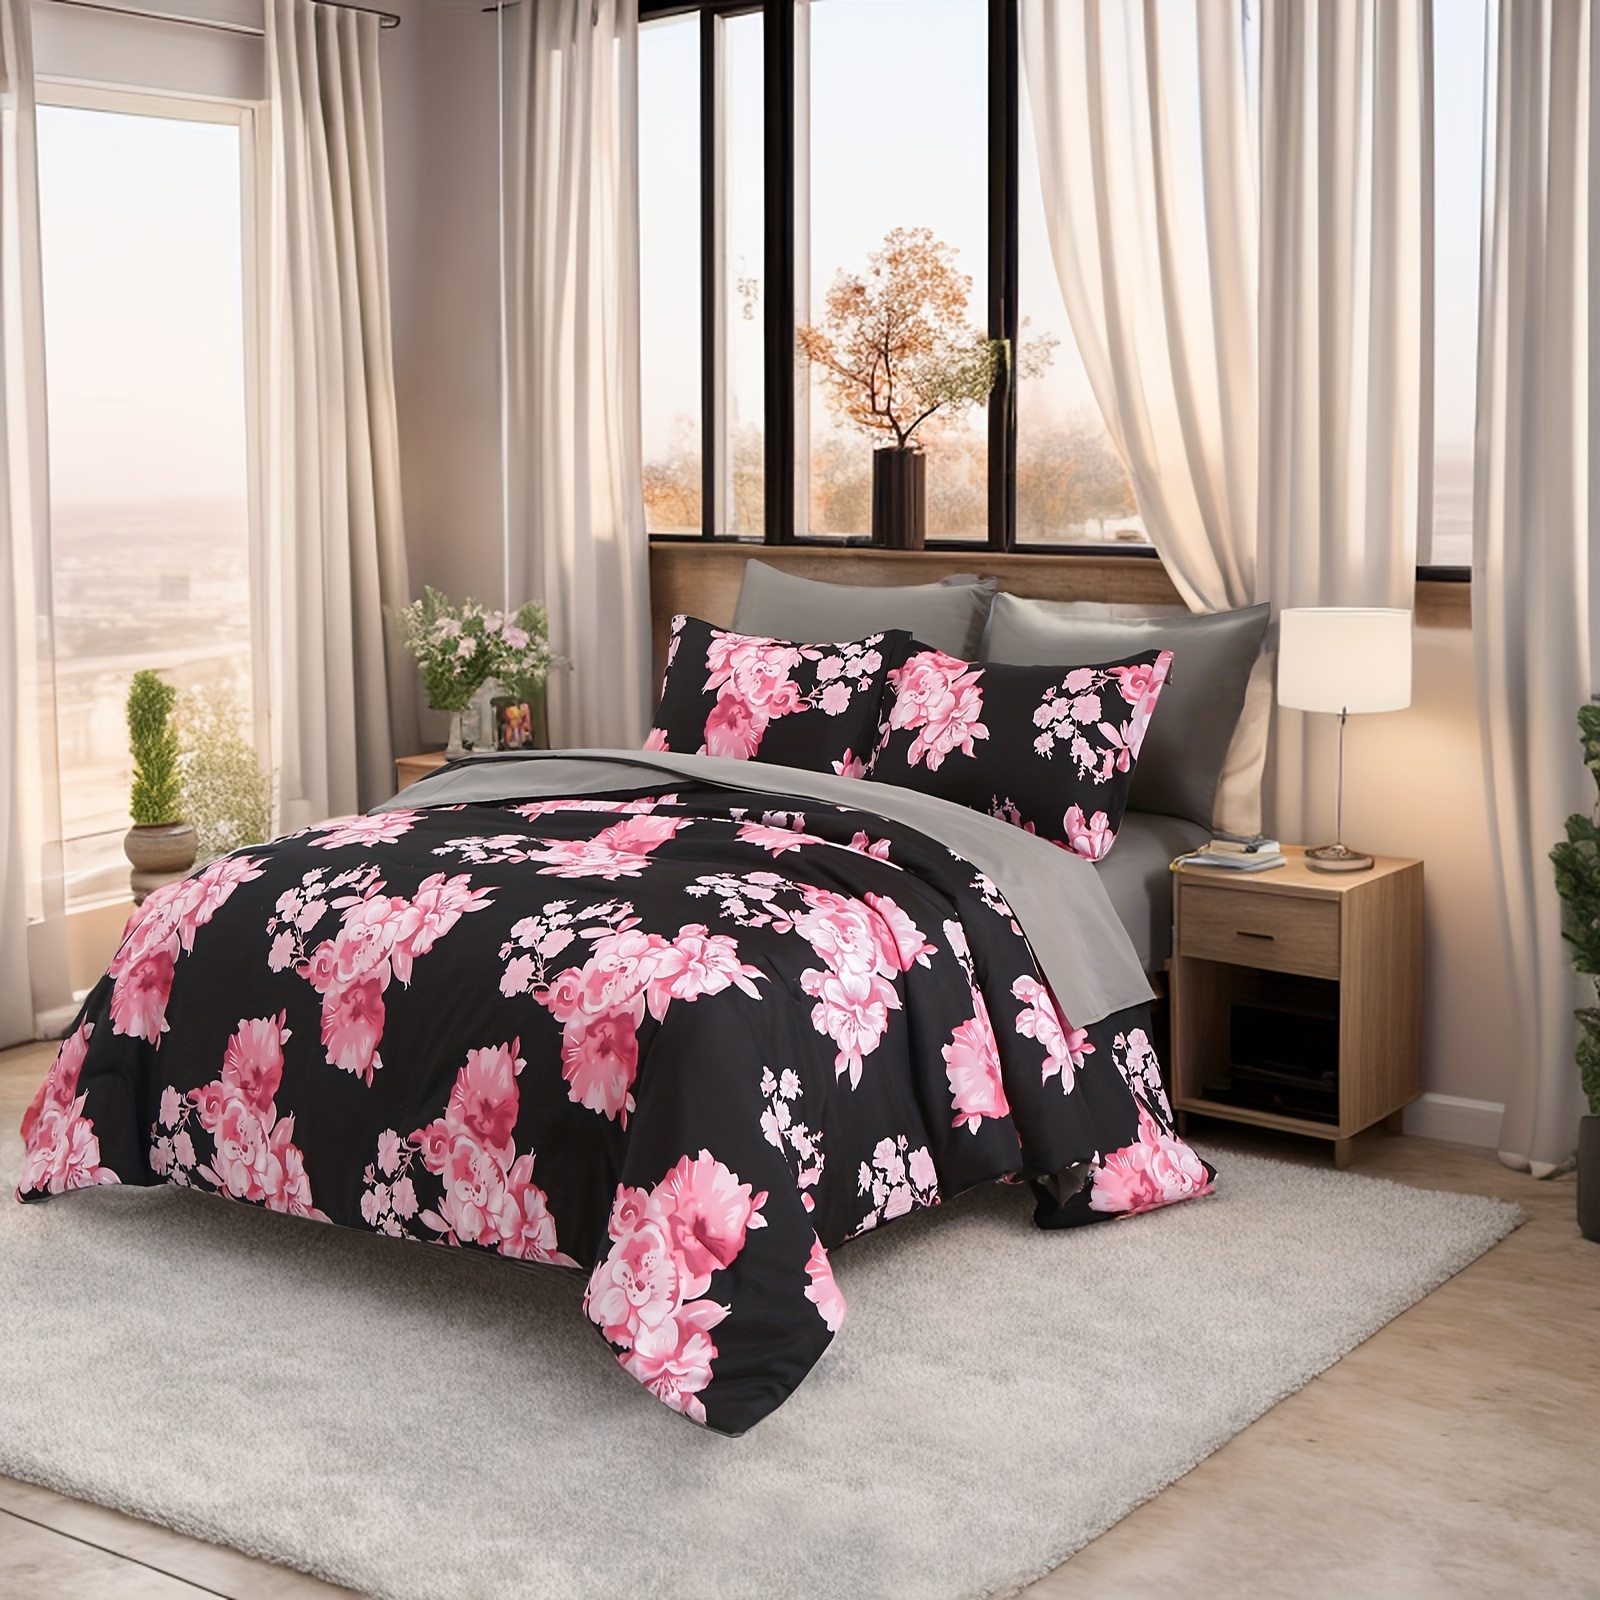 

7 Pcs Botanical Bed In A Bag Queen And King Comforter Set, Pink Floral On Black And Purple Floral On White - Stain-resistant, Hypoallergenic, And Lightweight Bedding For All Seasons